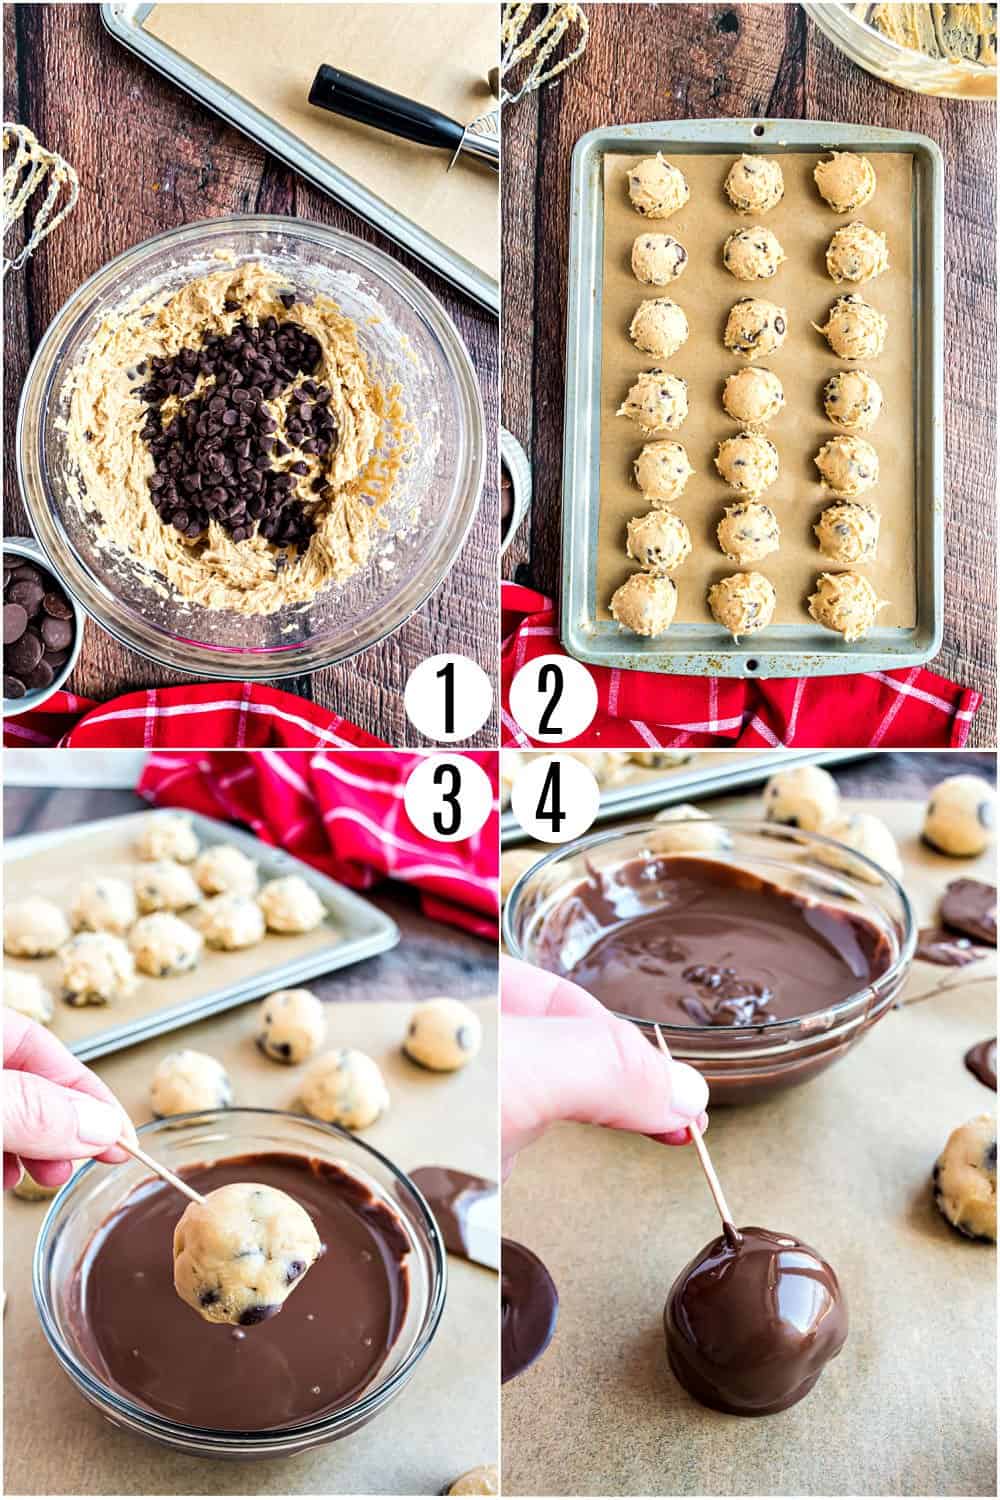 Step by step photos showing how to make cookie dough truffles.